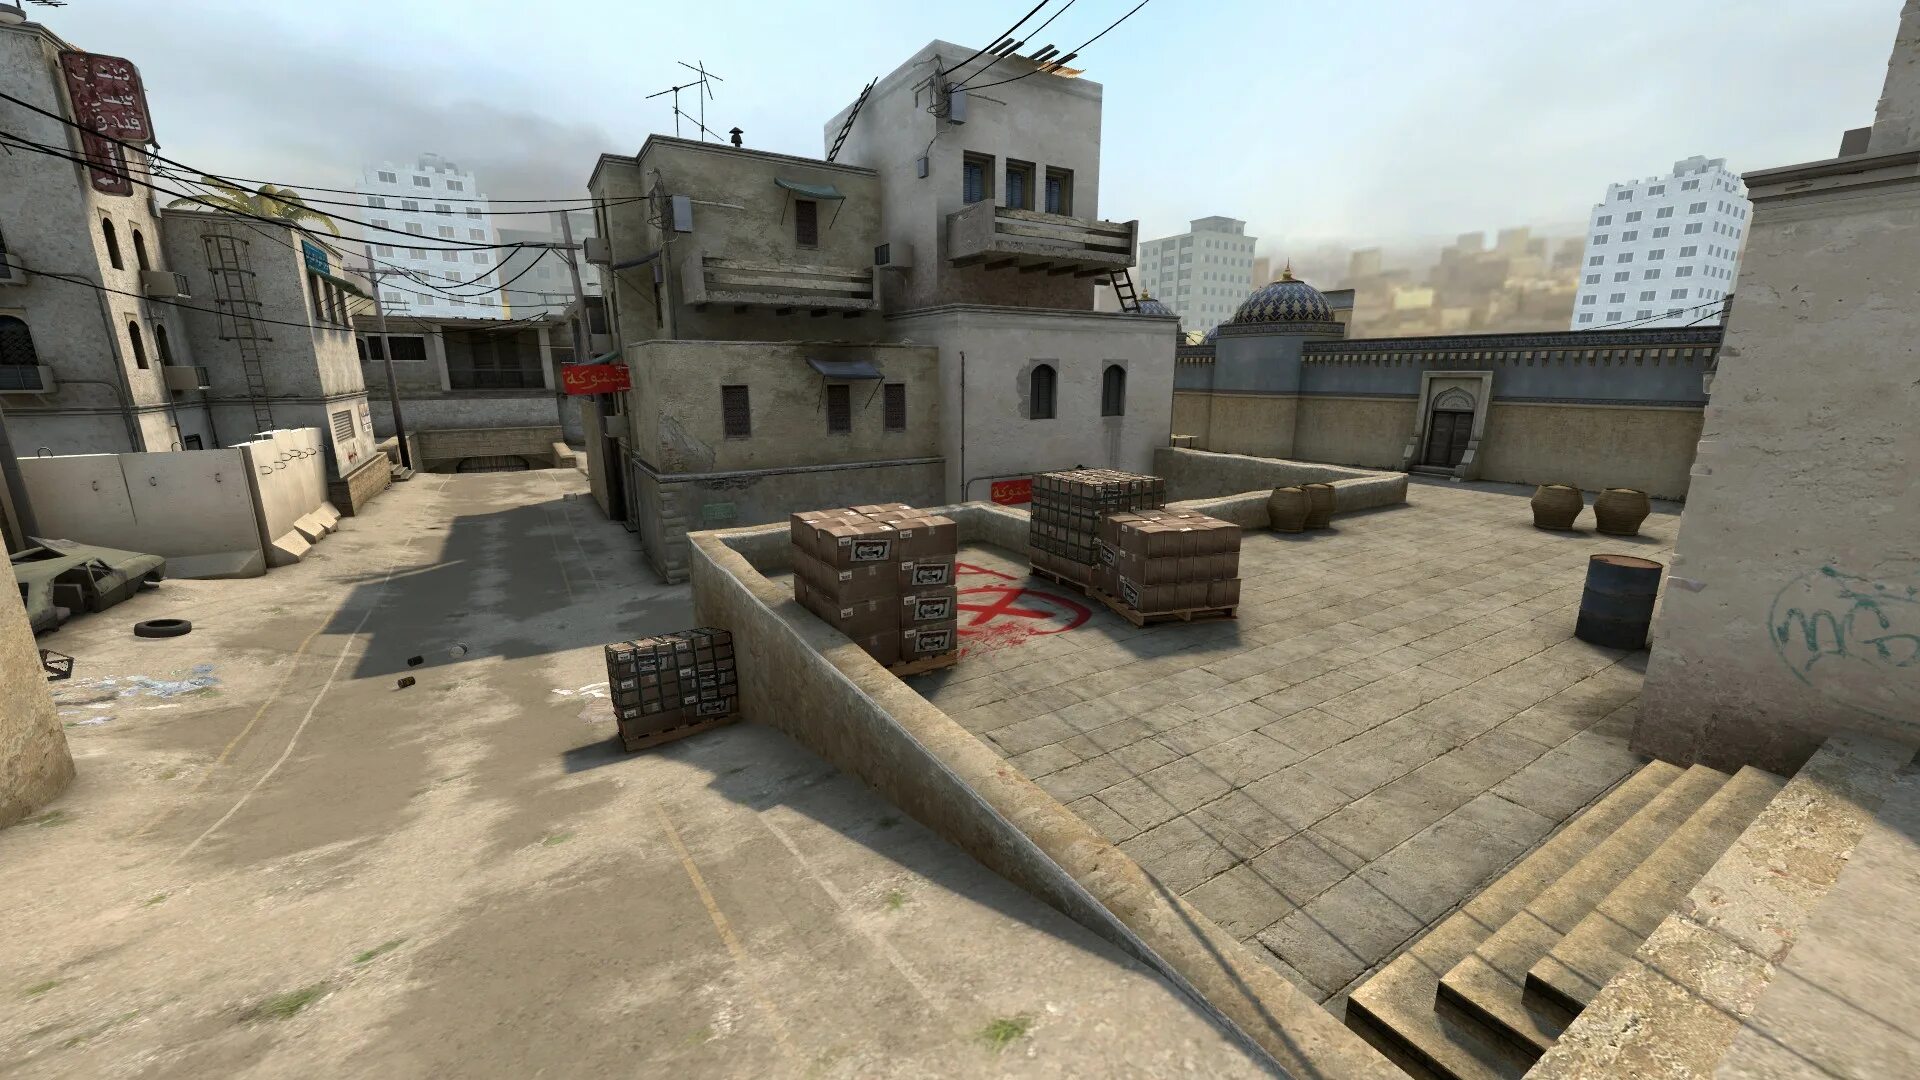 Dust 2 CS go. КС го дуст 2. Даст 2 а плент. Б плент даст 2 КС го. Даст further